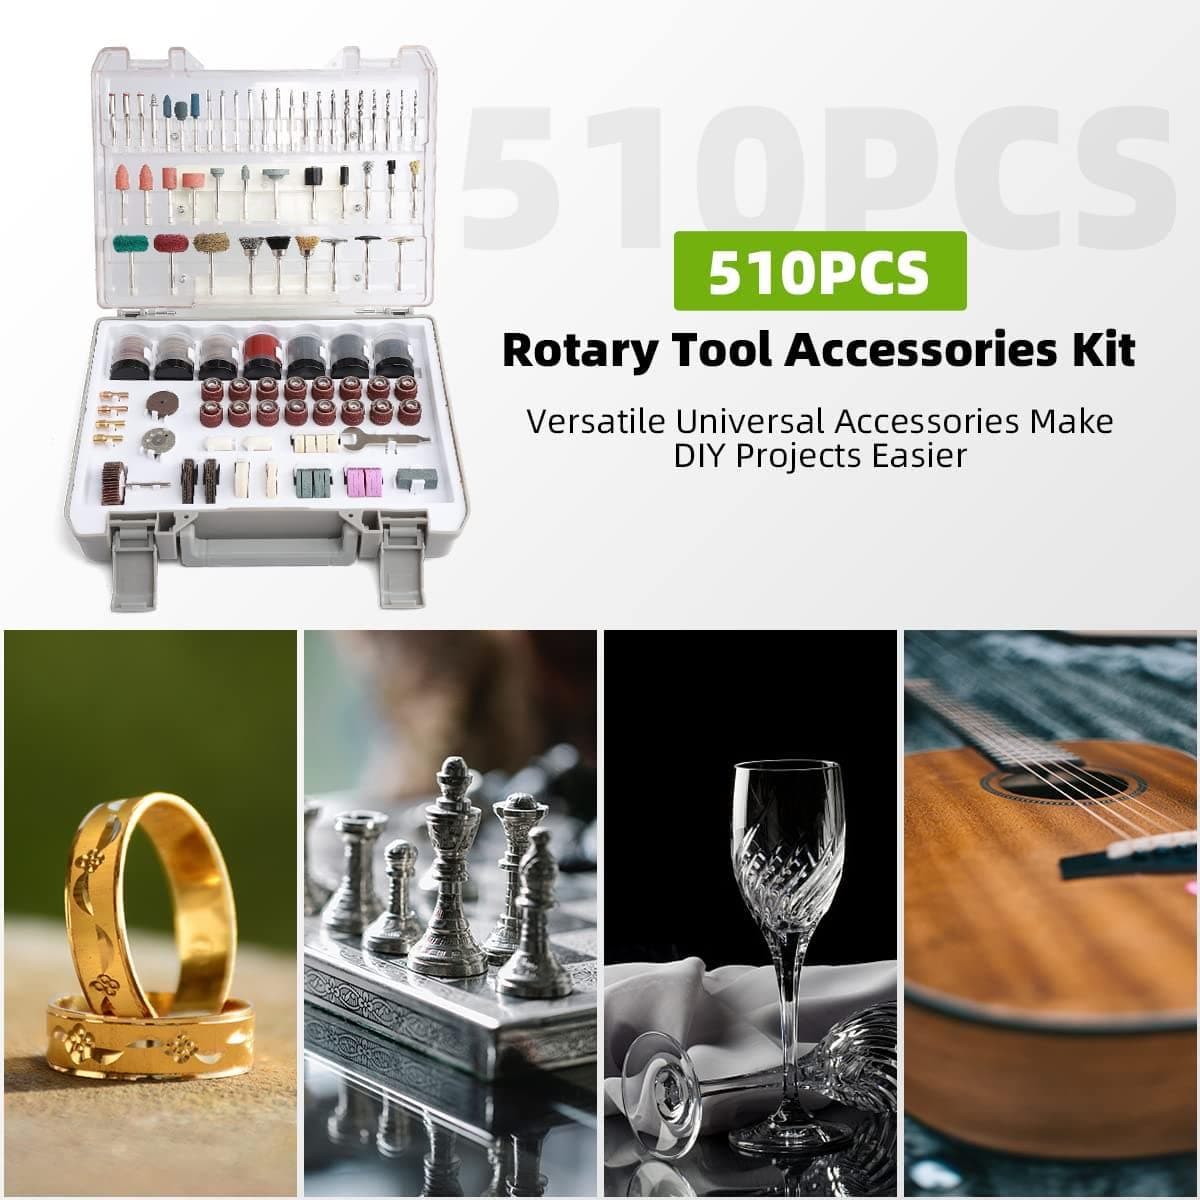 HUEPAR RT510 Rotary Tool Accessories Kit with free shipping available at HUEPAR US0